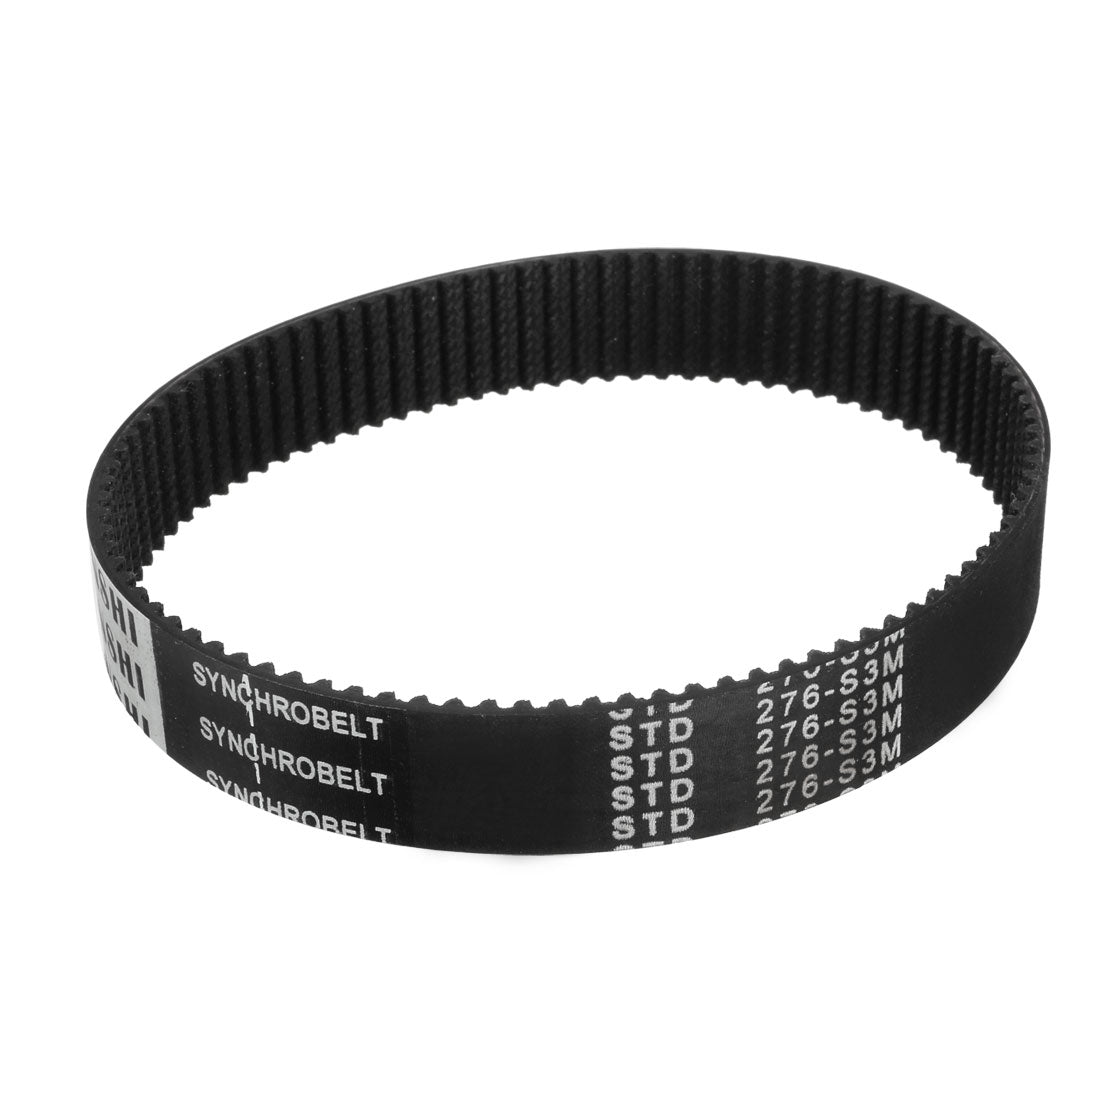 uxcell Uxcell S3M276 Rubber Timing Belt Synchronous Closed Loop Timing Belt Pulleys 15mm Width